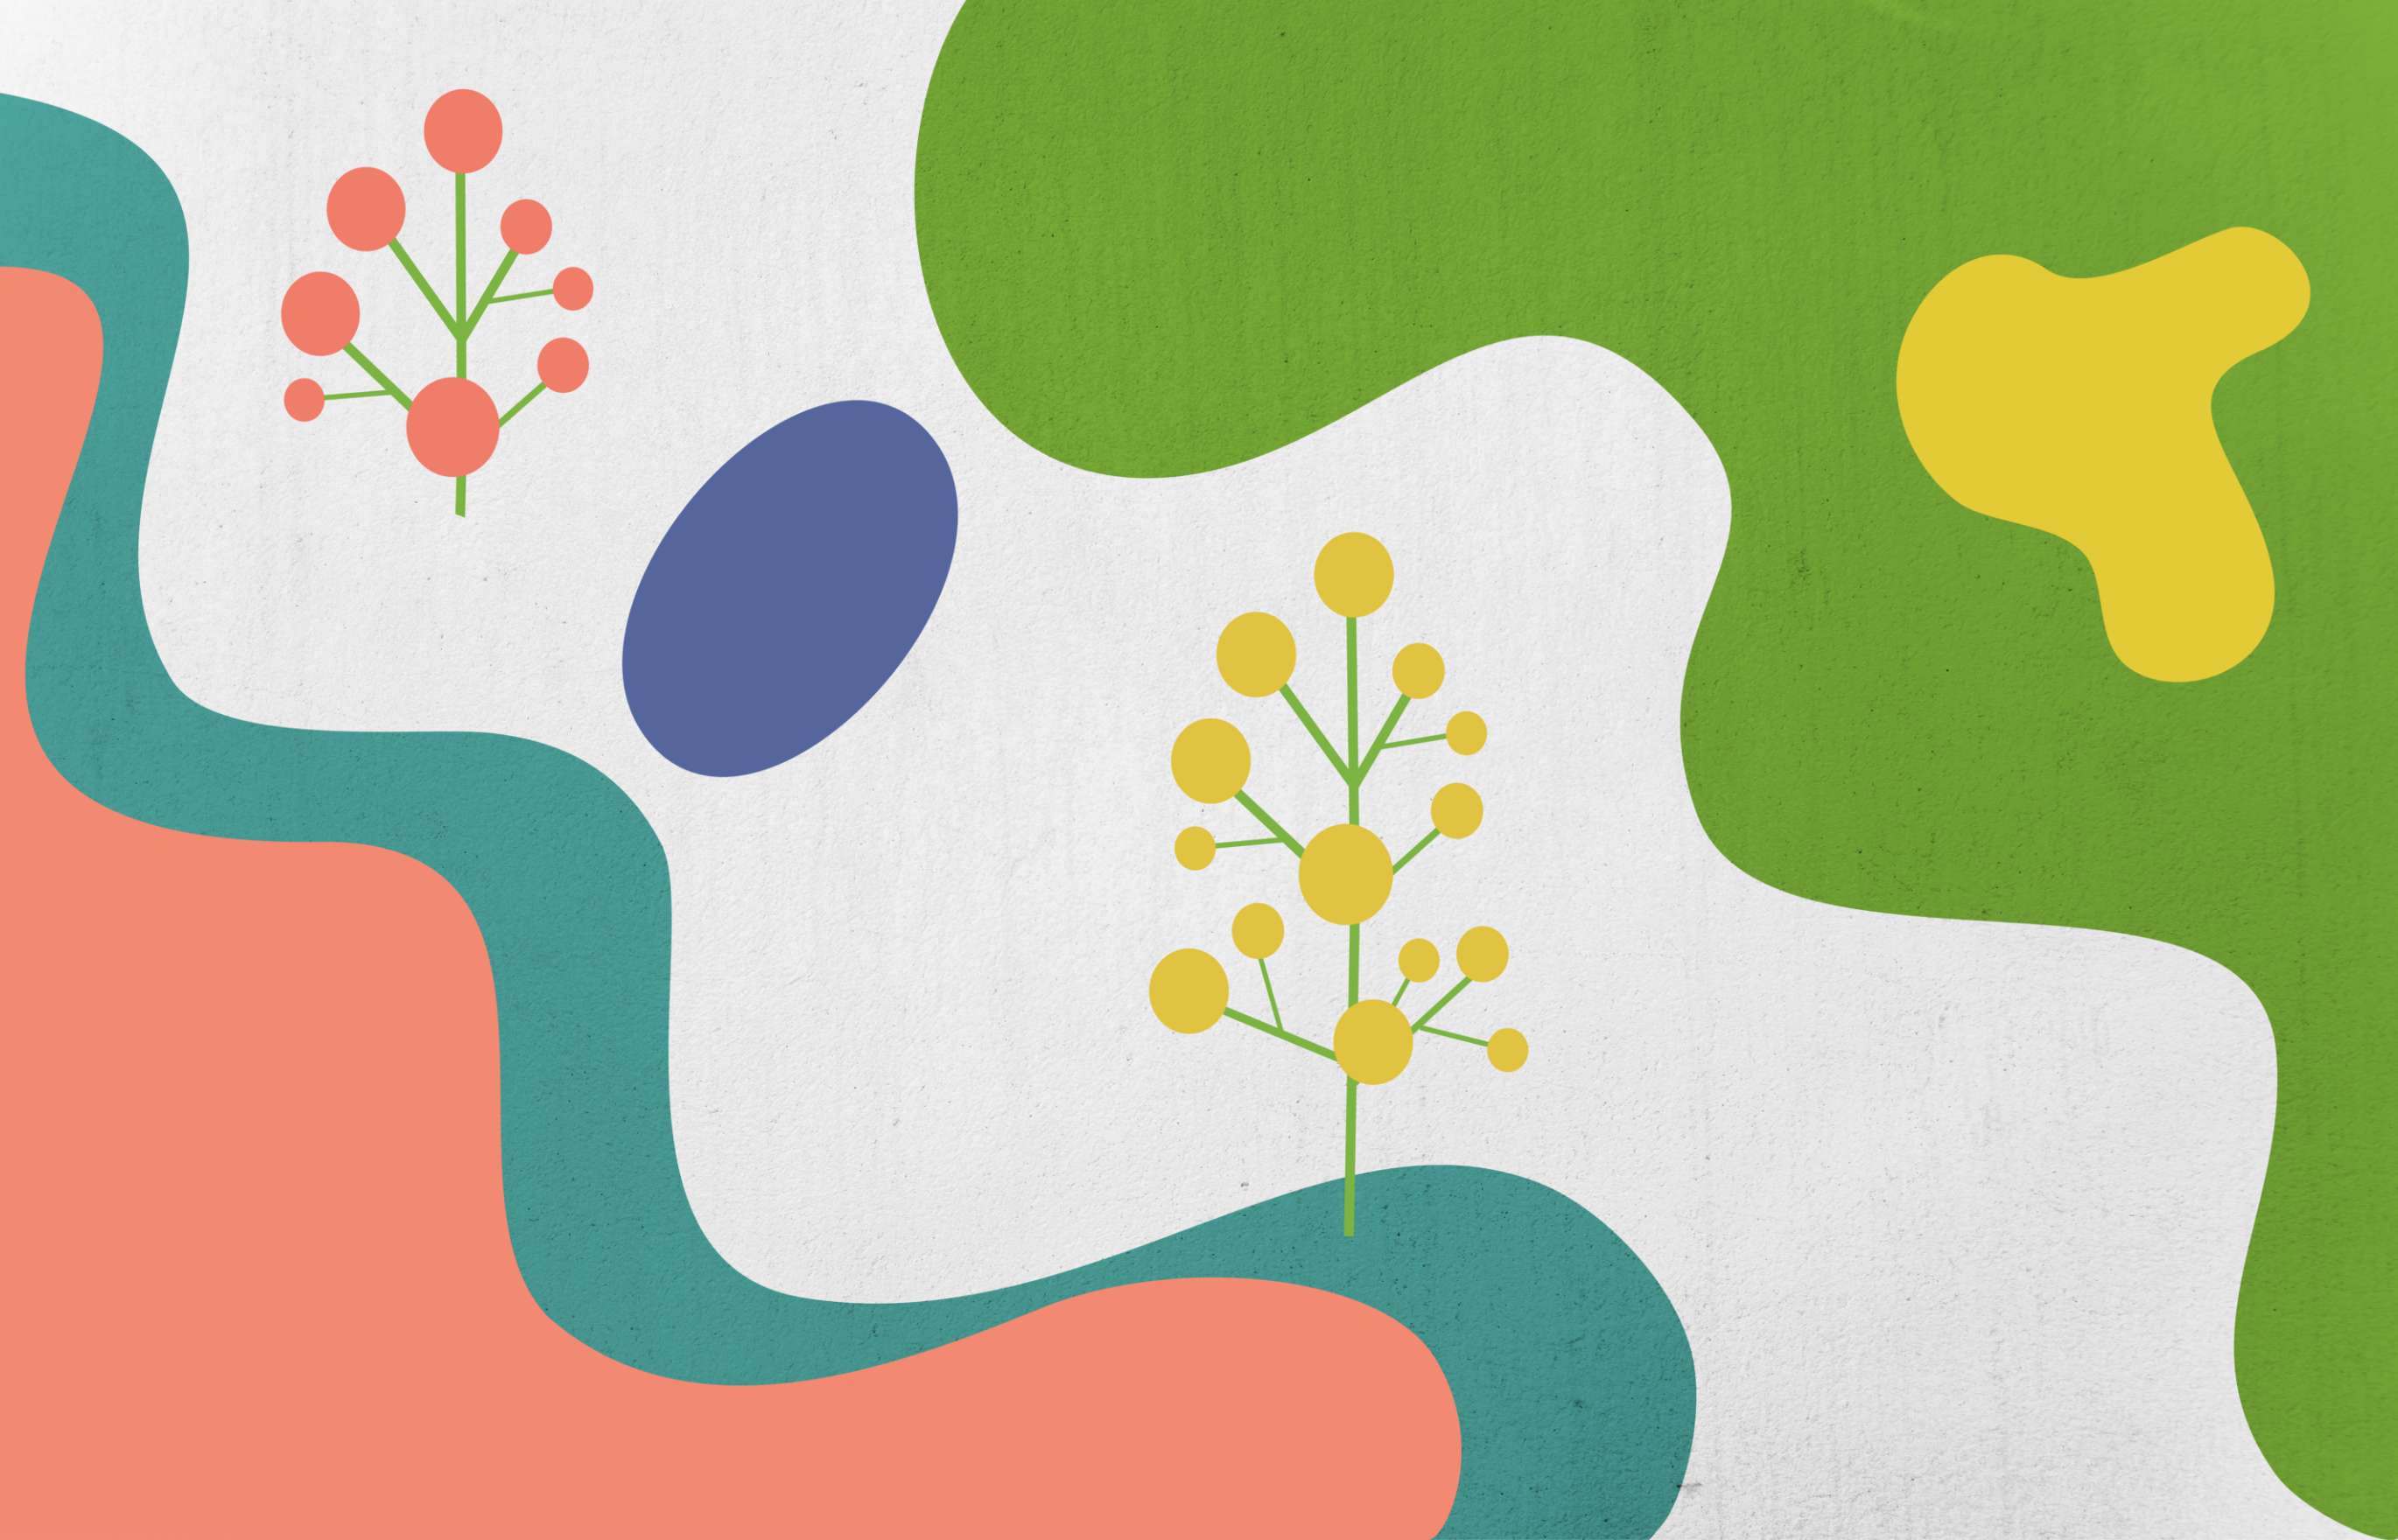 An flowing, abstract illustration in salmon, turquoise, green, and yellow, constructed of shapes that suggest growing plants amid a rolling terrain.